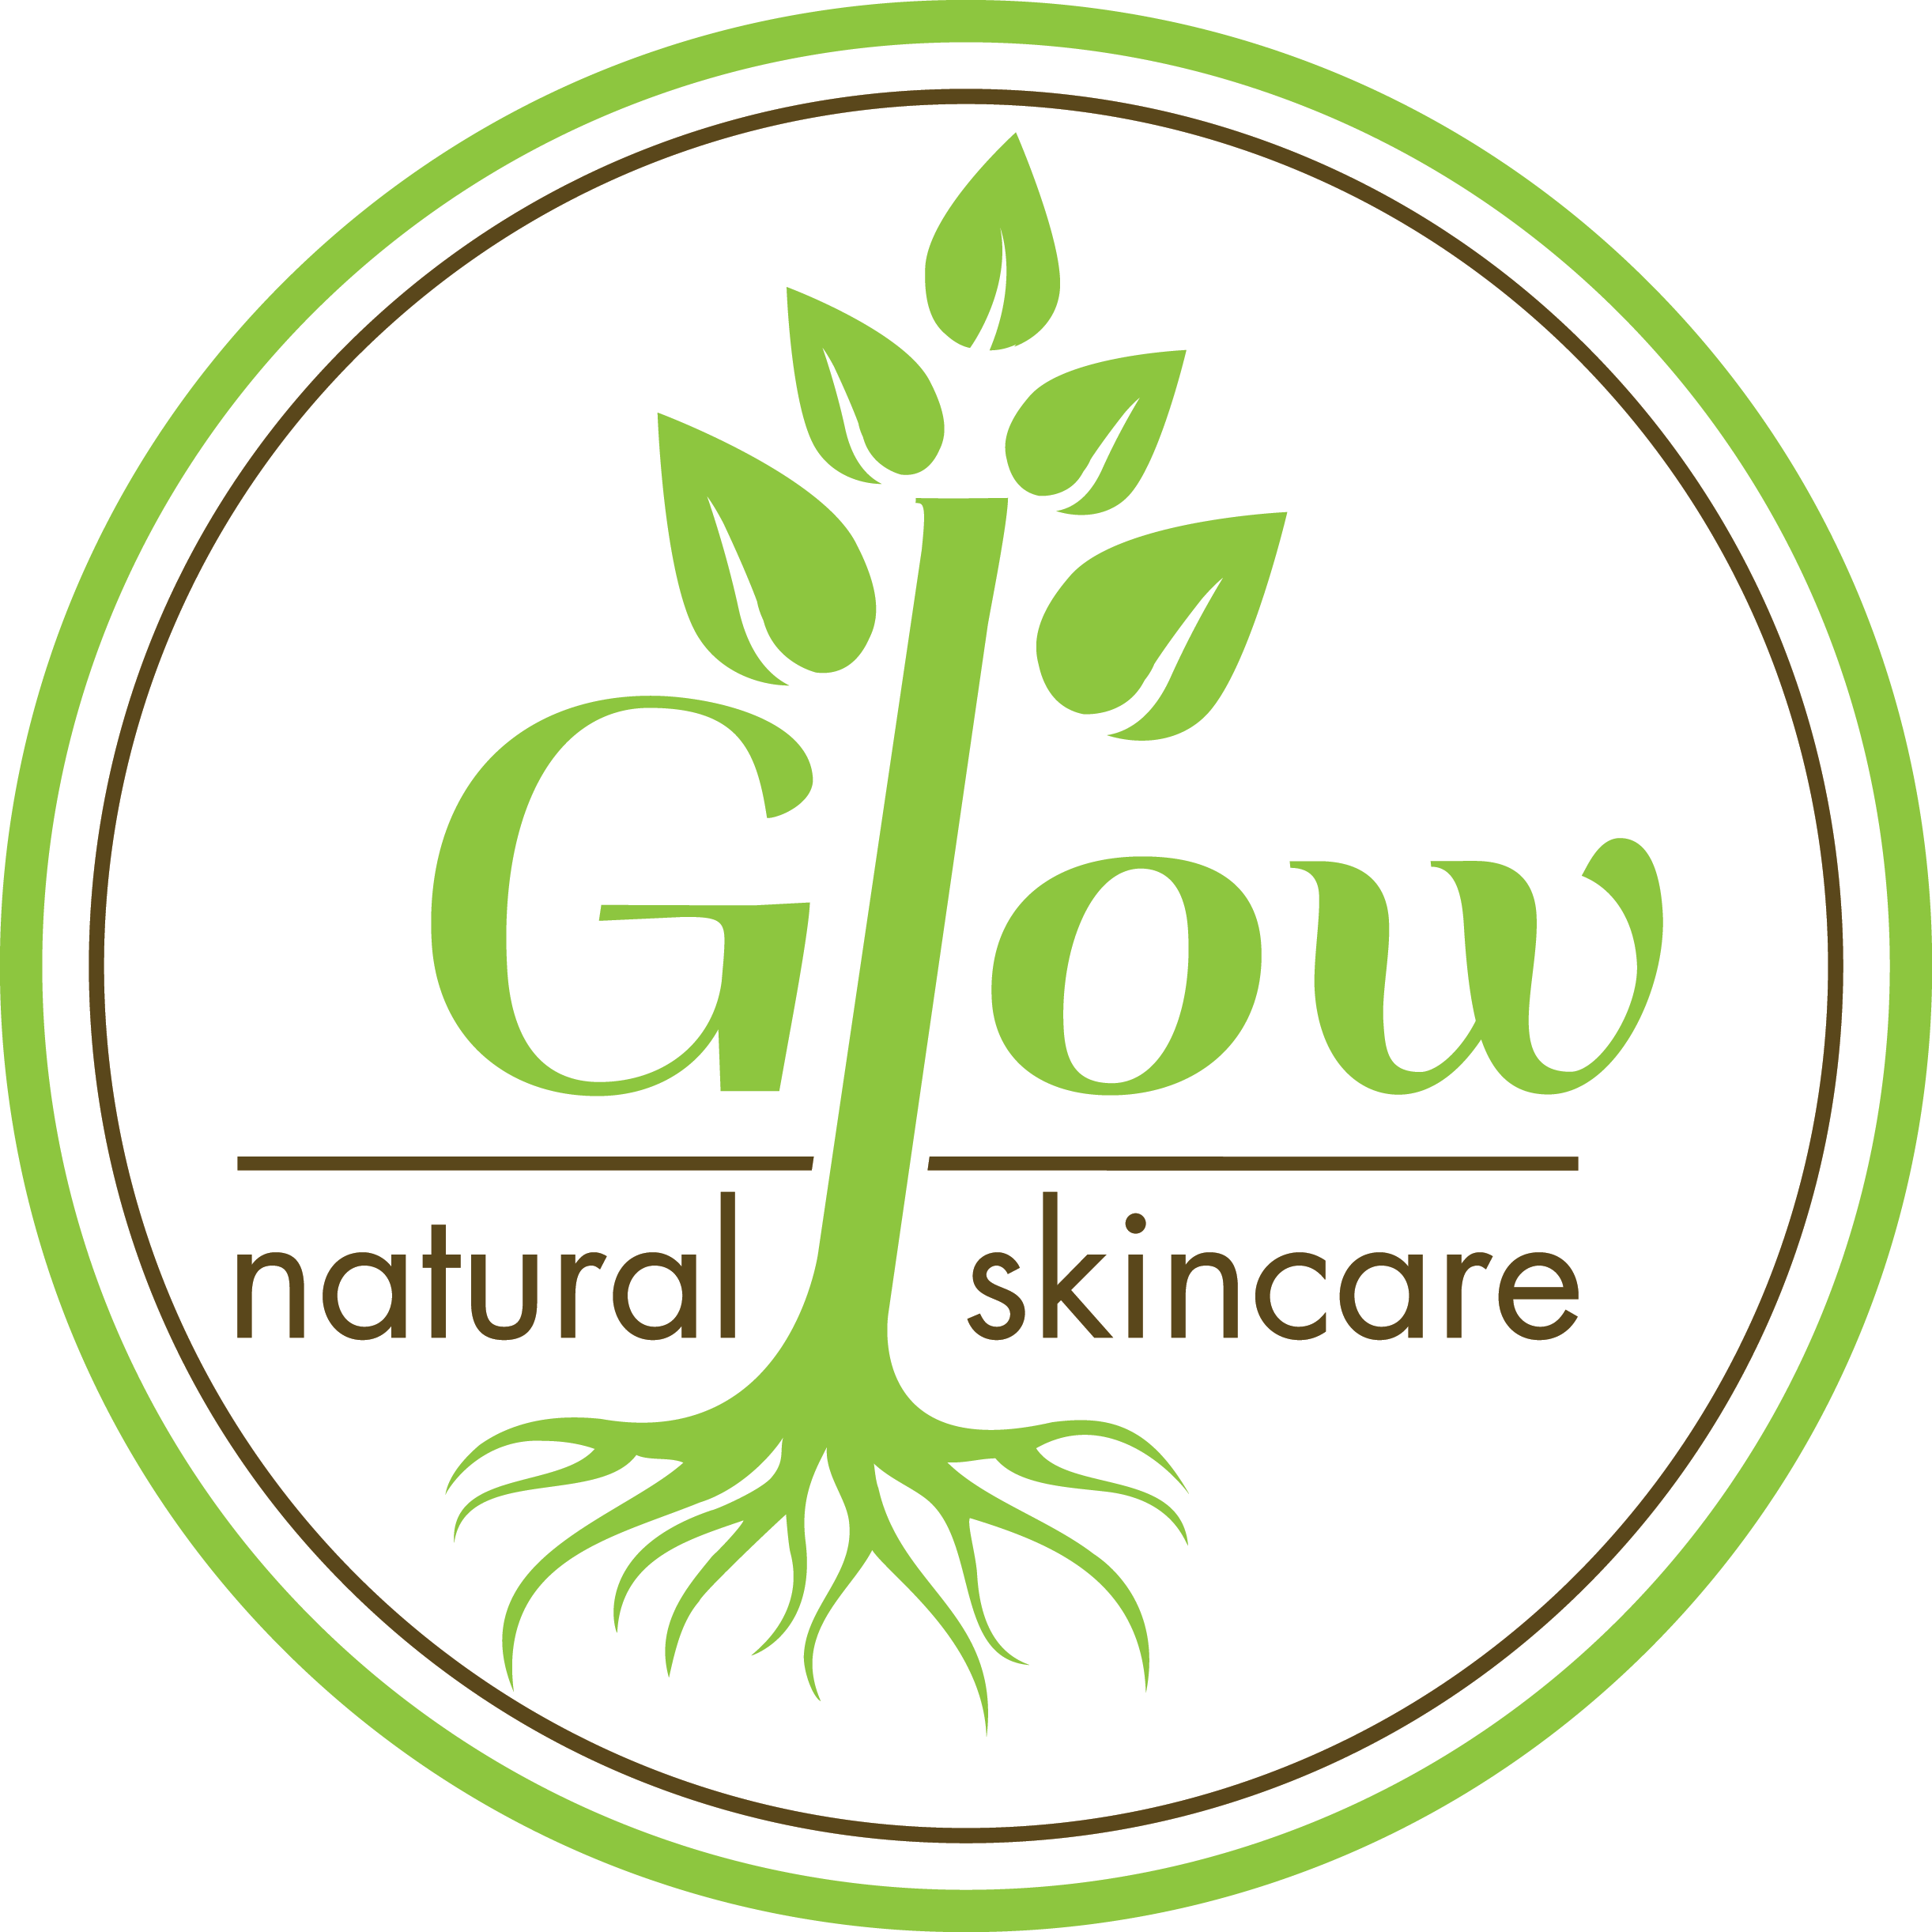 GLOW is a #natural #skincare company  operating in #ShPk and #yeg , AB, Canada. http://t.co/pcuOr3mhFP http://t.co/sjNaCc4DQ1